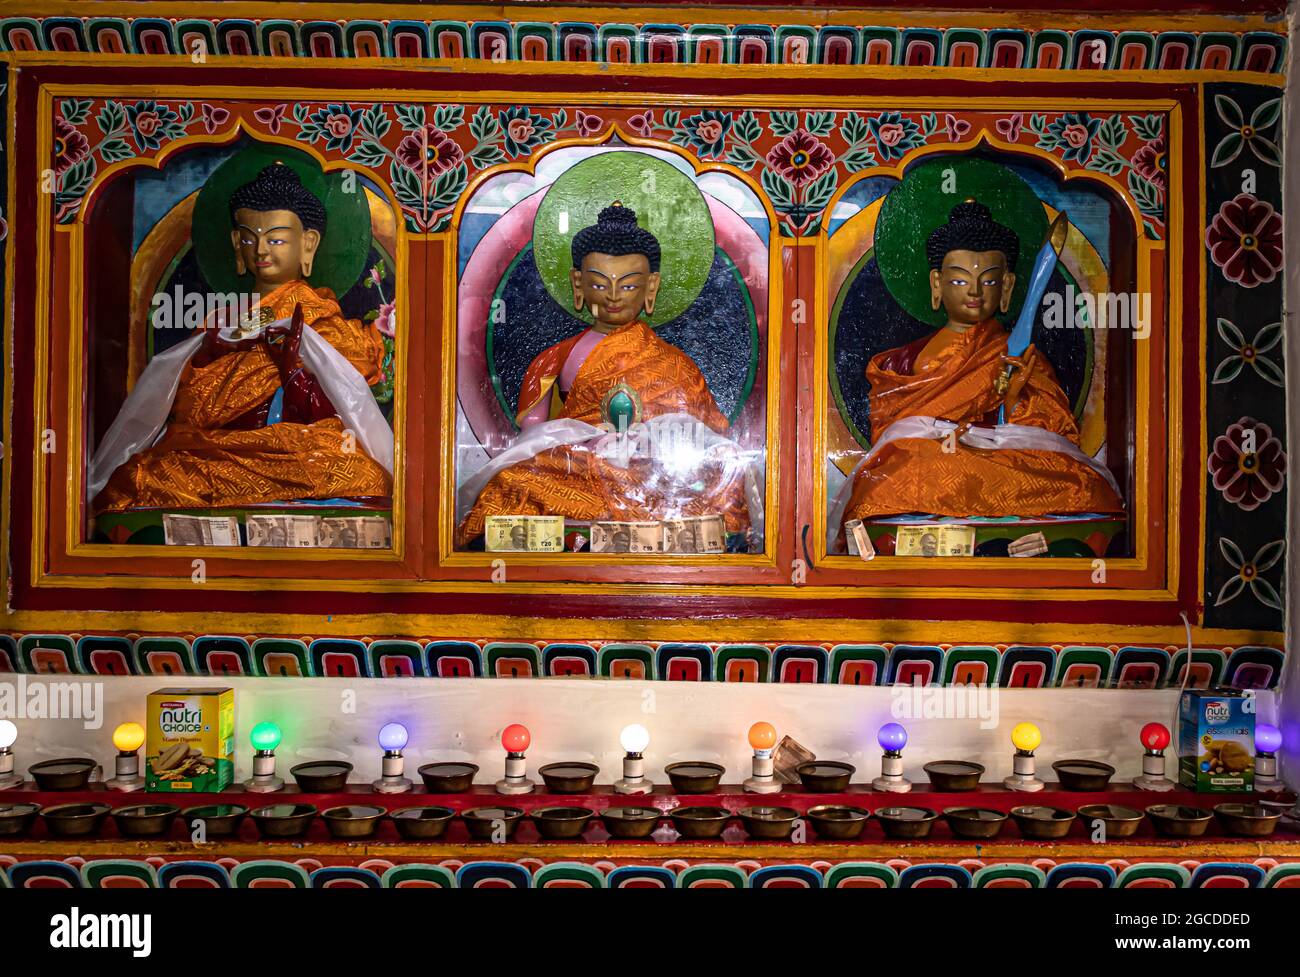 ancient buddhist monastery with Buddha statue and decorated wall from different angle image is taken at tawang monastery arunachal pradesh india. Stock Photo